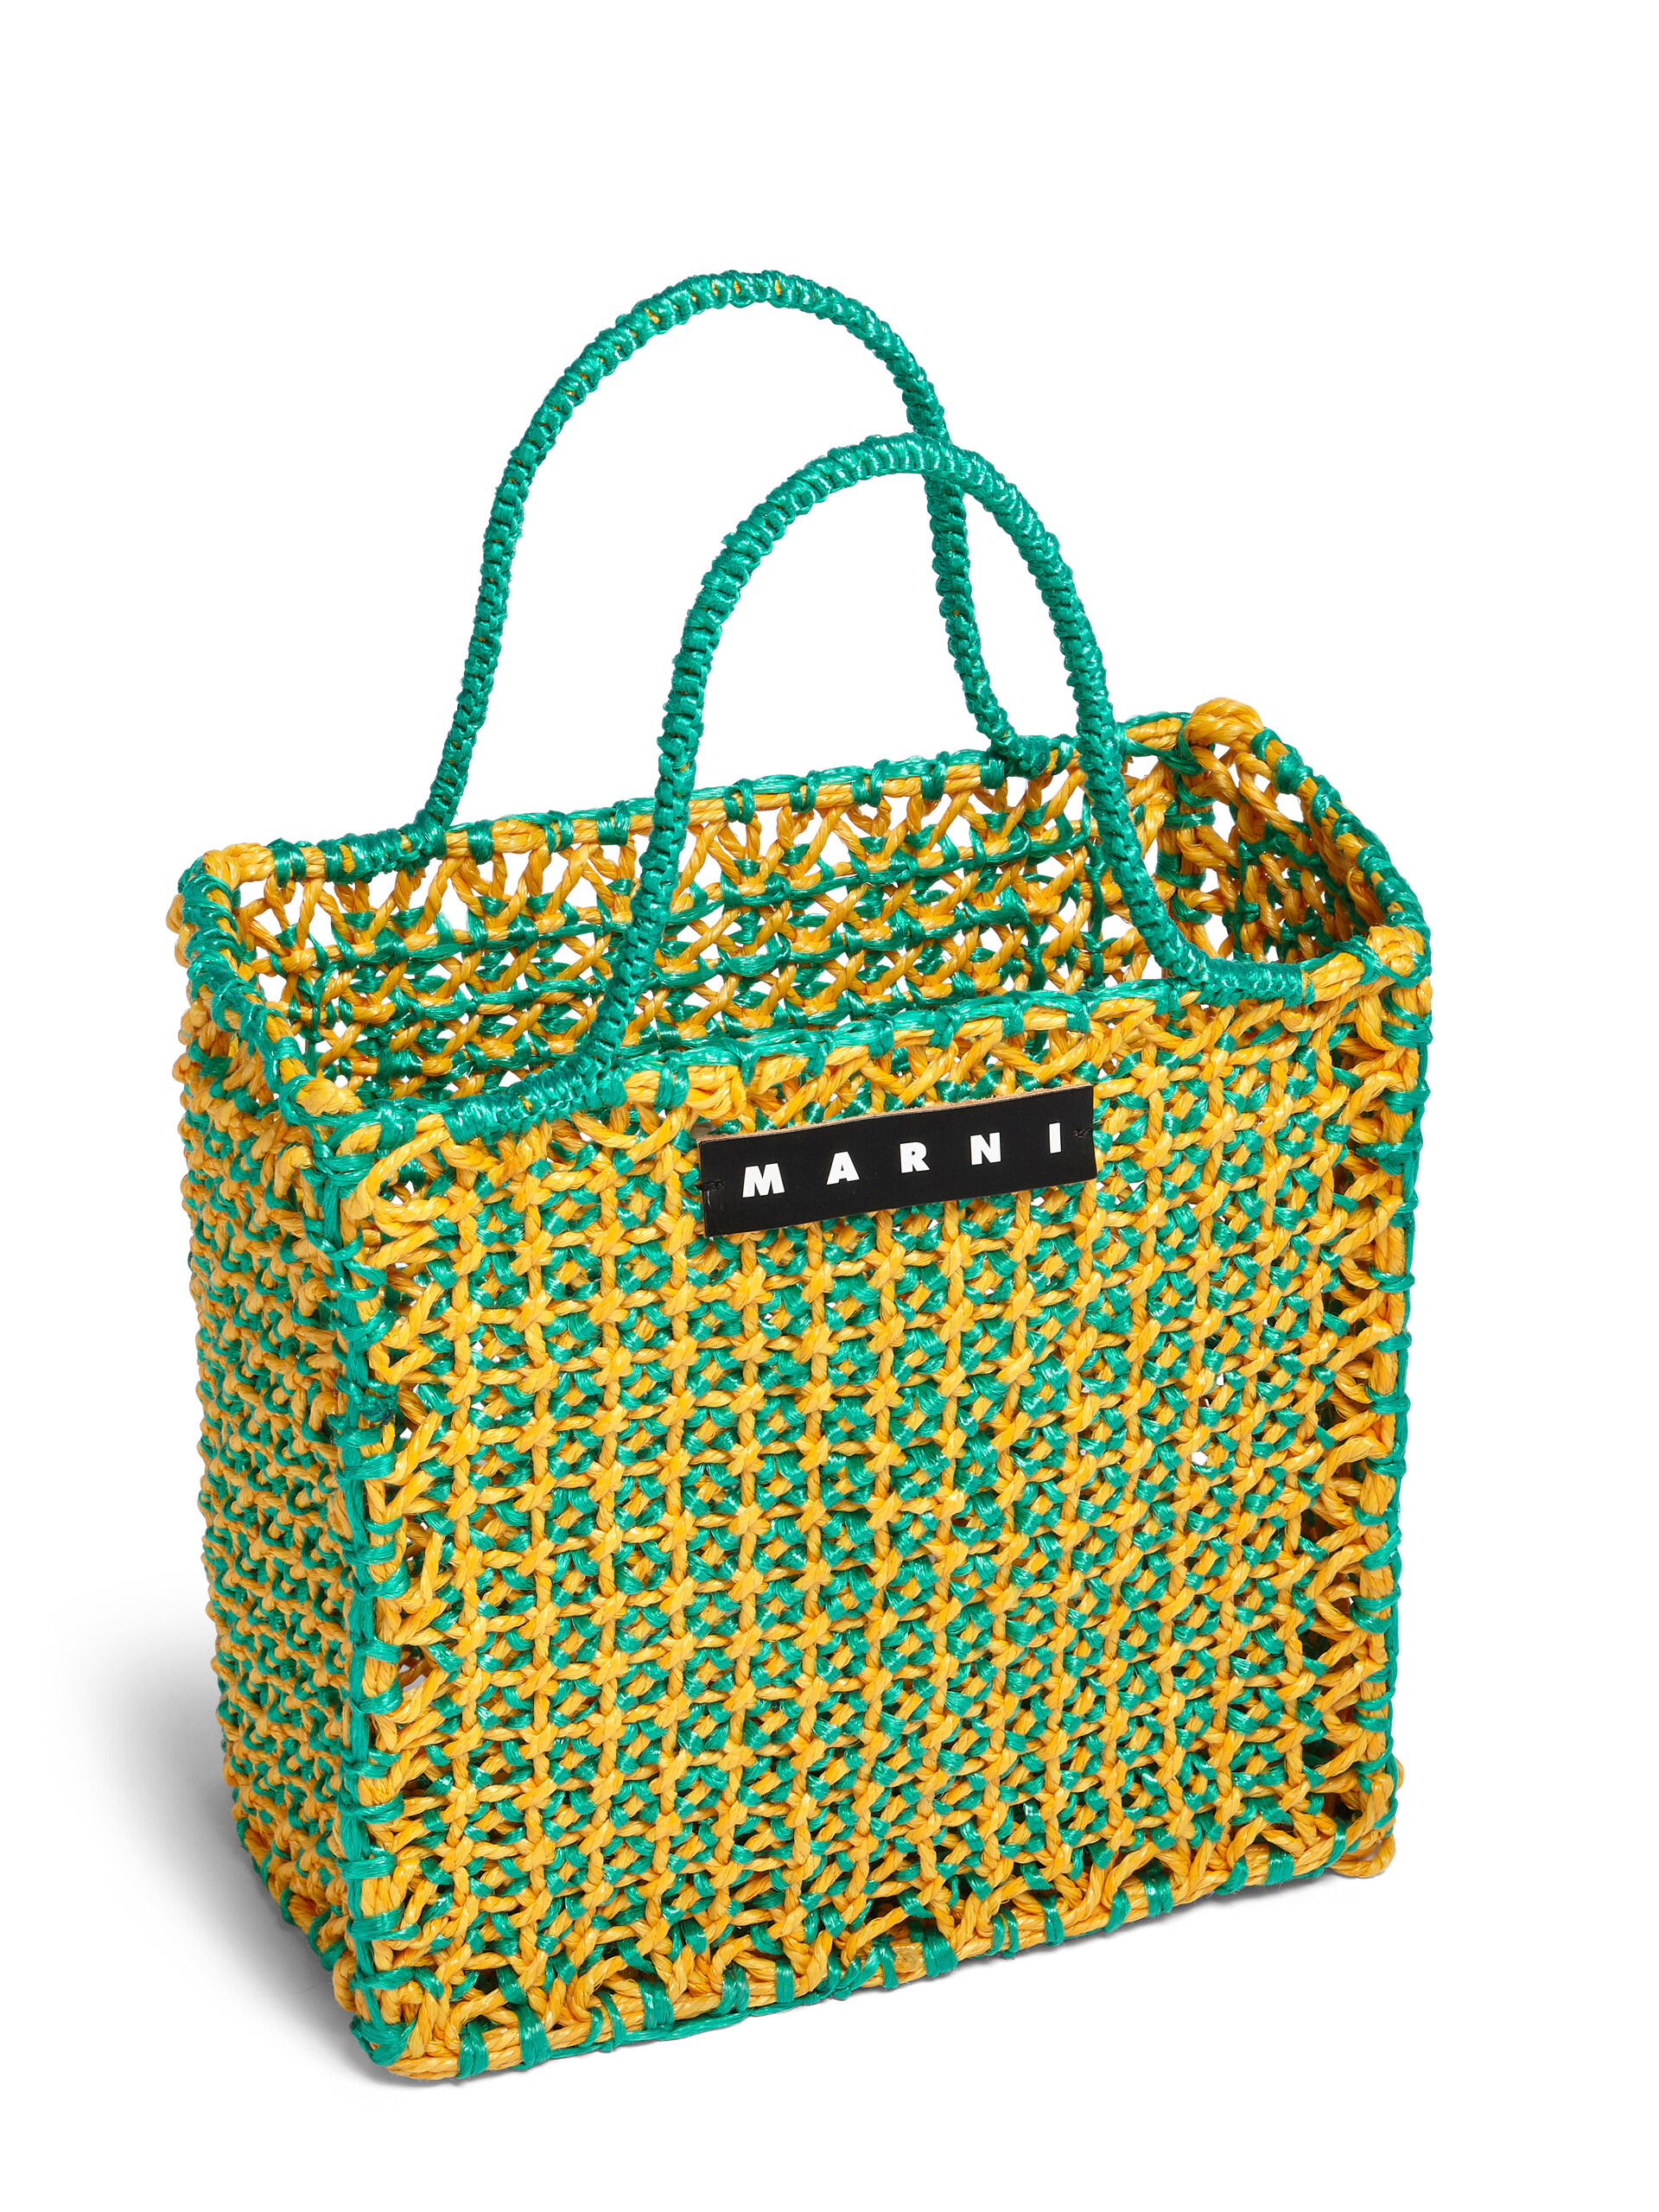 MARNI MARKET large bag in green and yellow crochet - Bags - Image 4